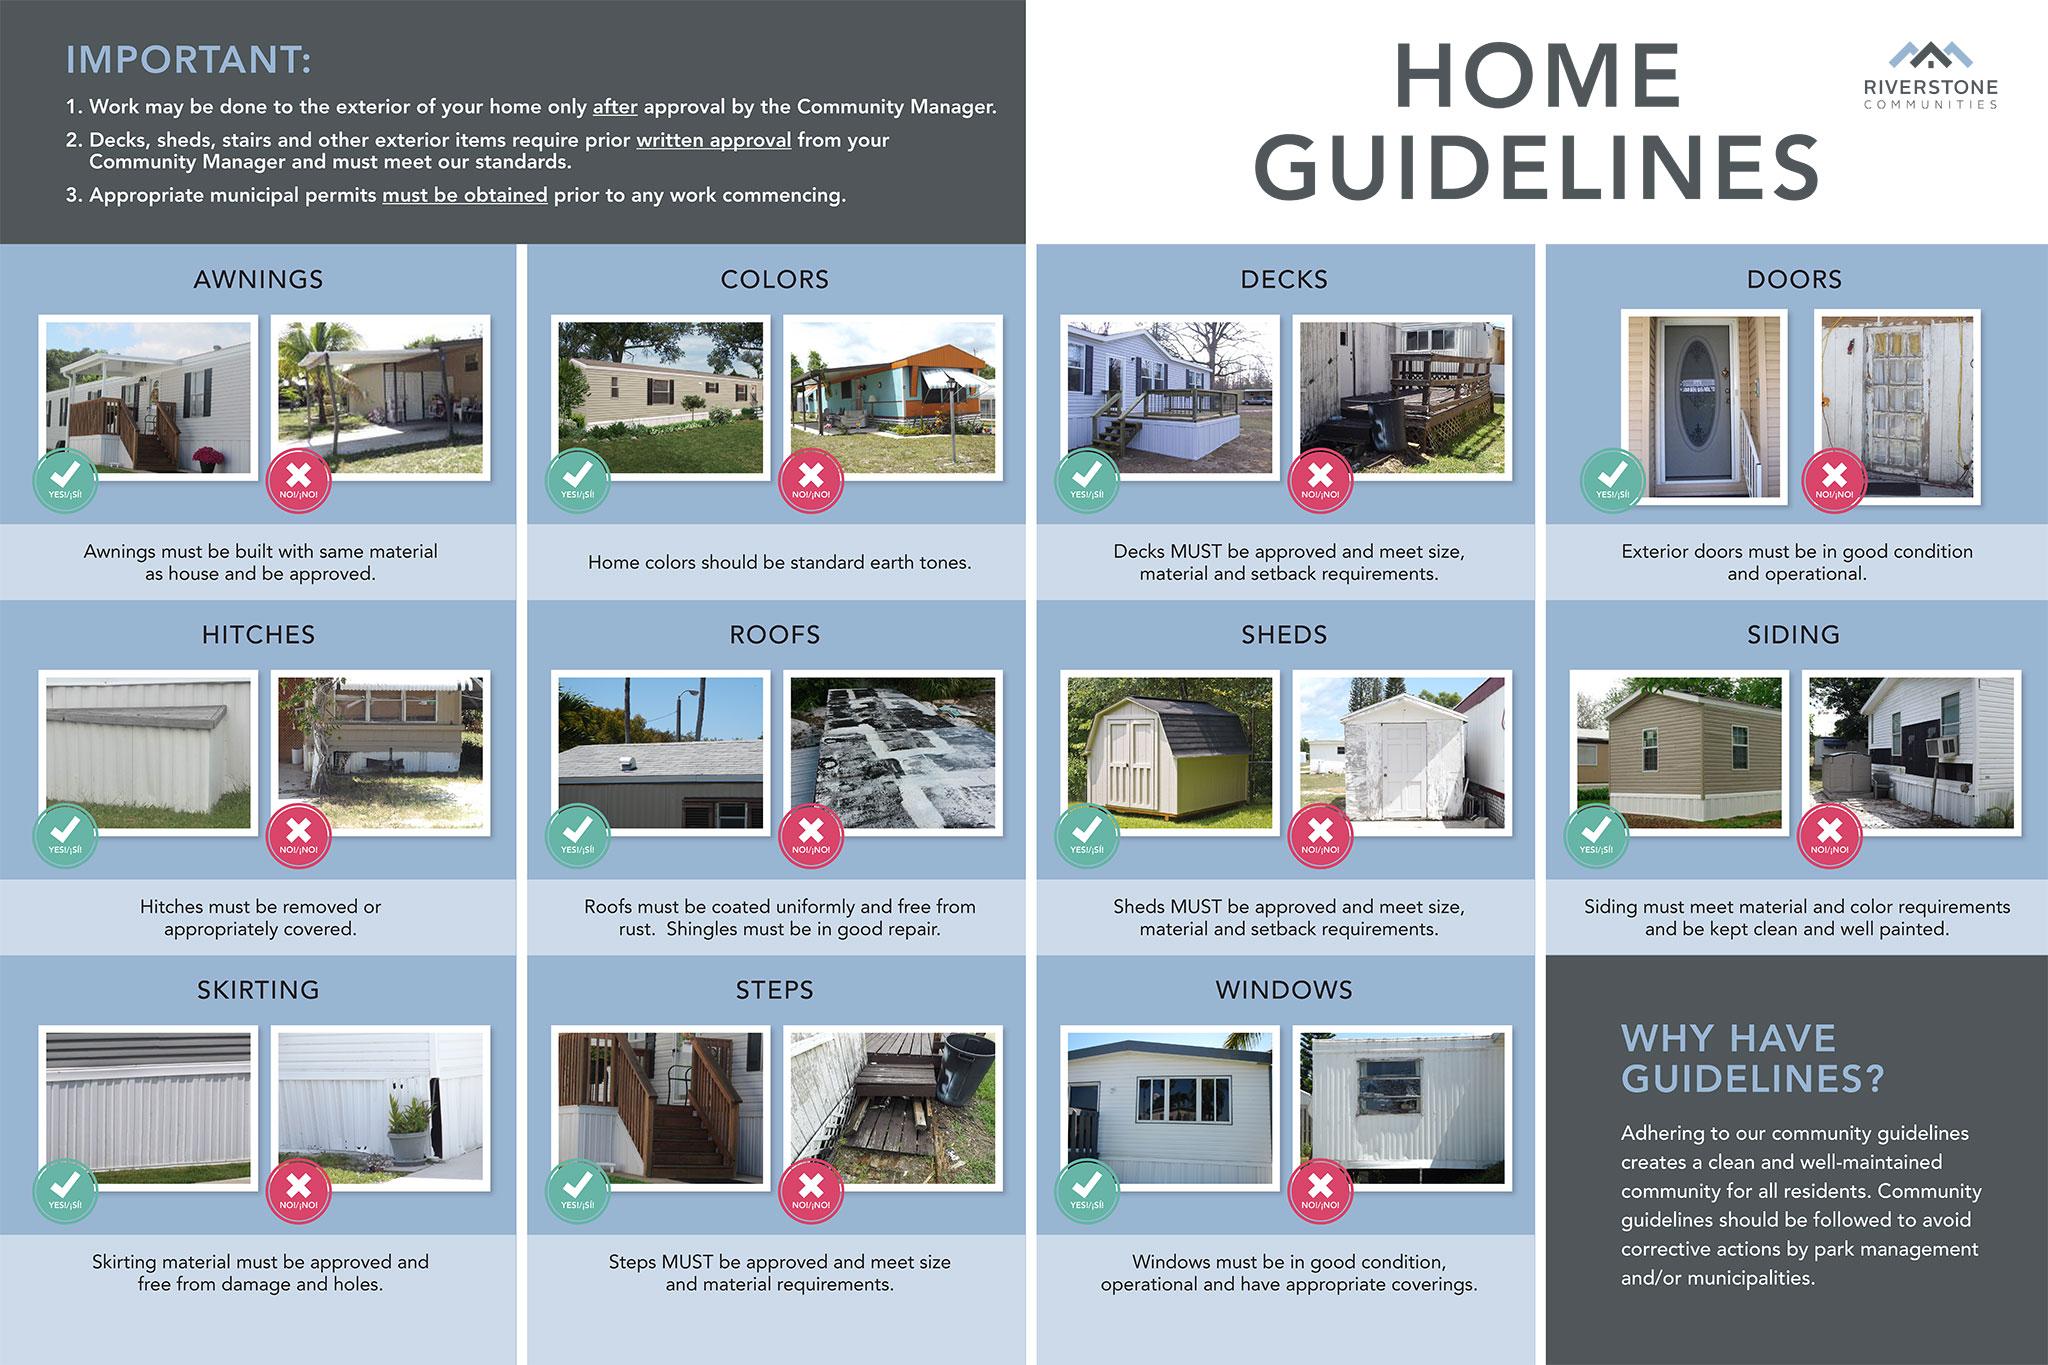 Home Guidelines